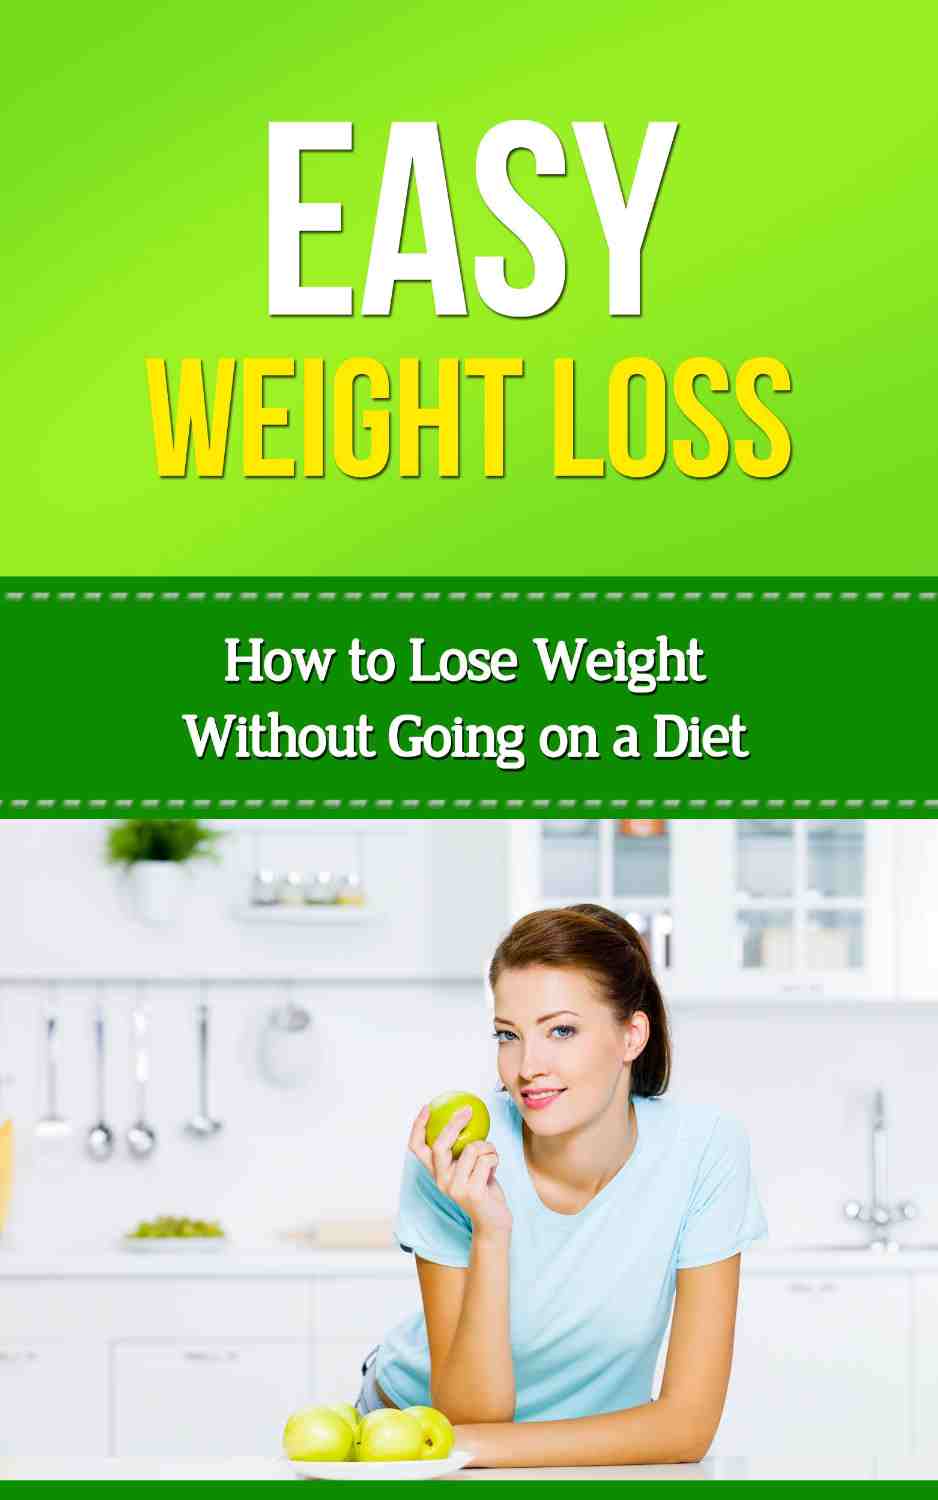 Easy Weightloss: How to Lose Weight Without Going on a Diet (Easy Health Book 1) by Donelle Hargrave